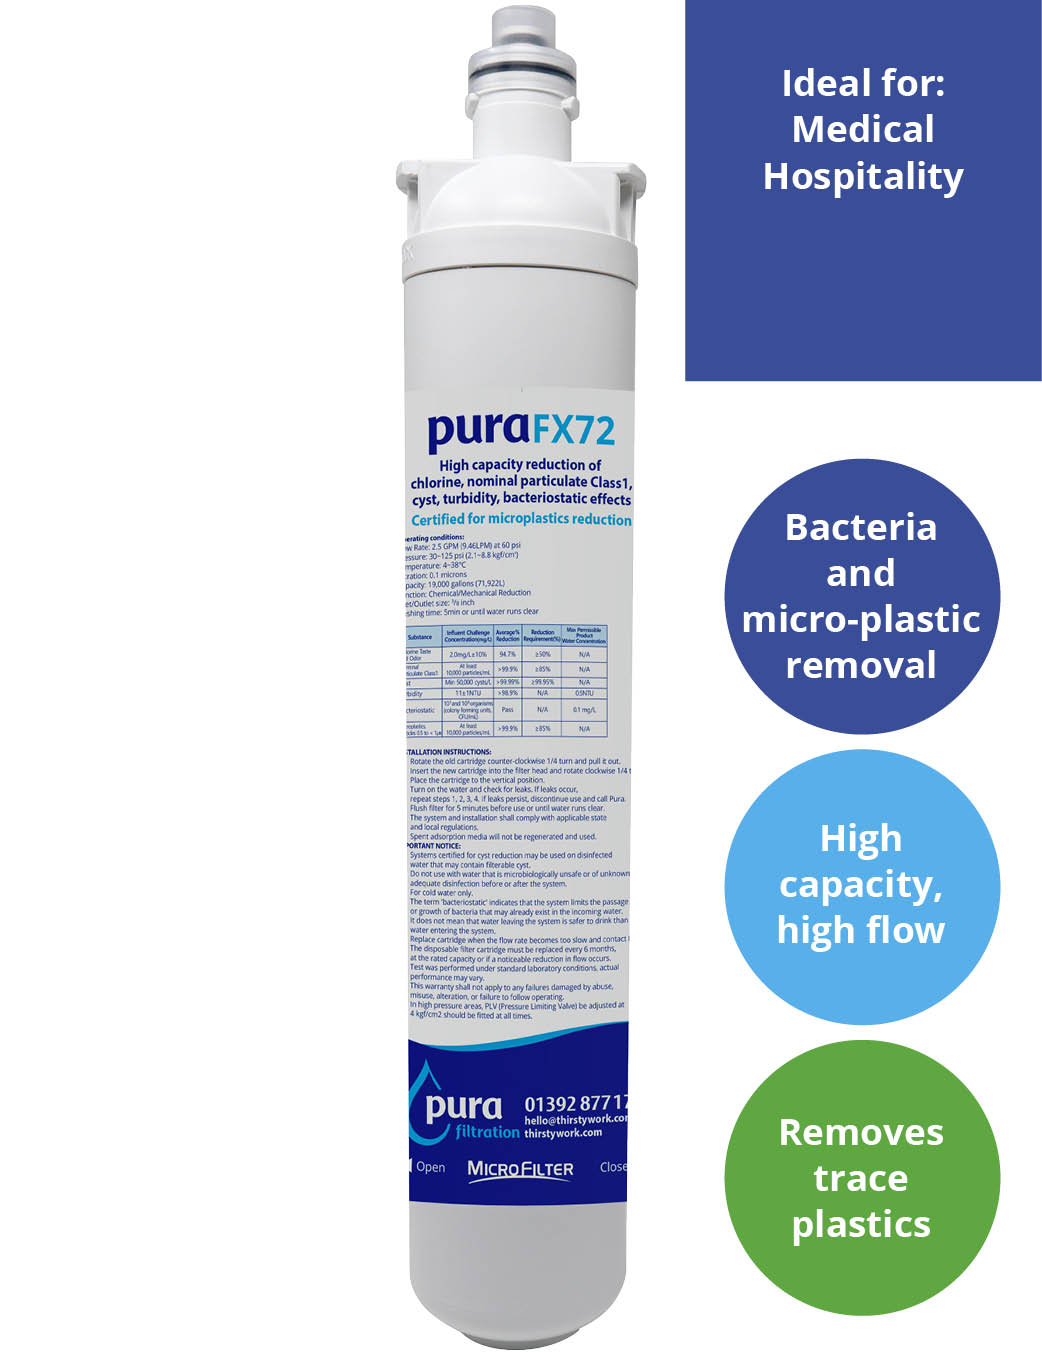 high capacity water filter for medical and hospitality use